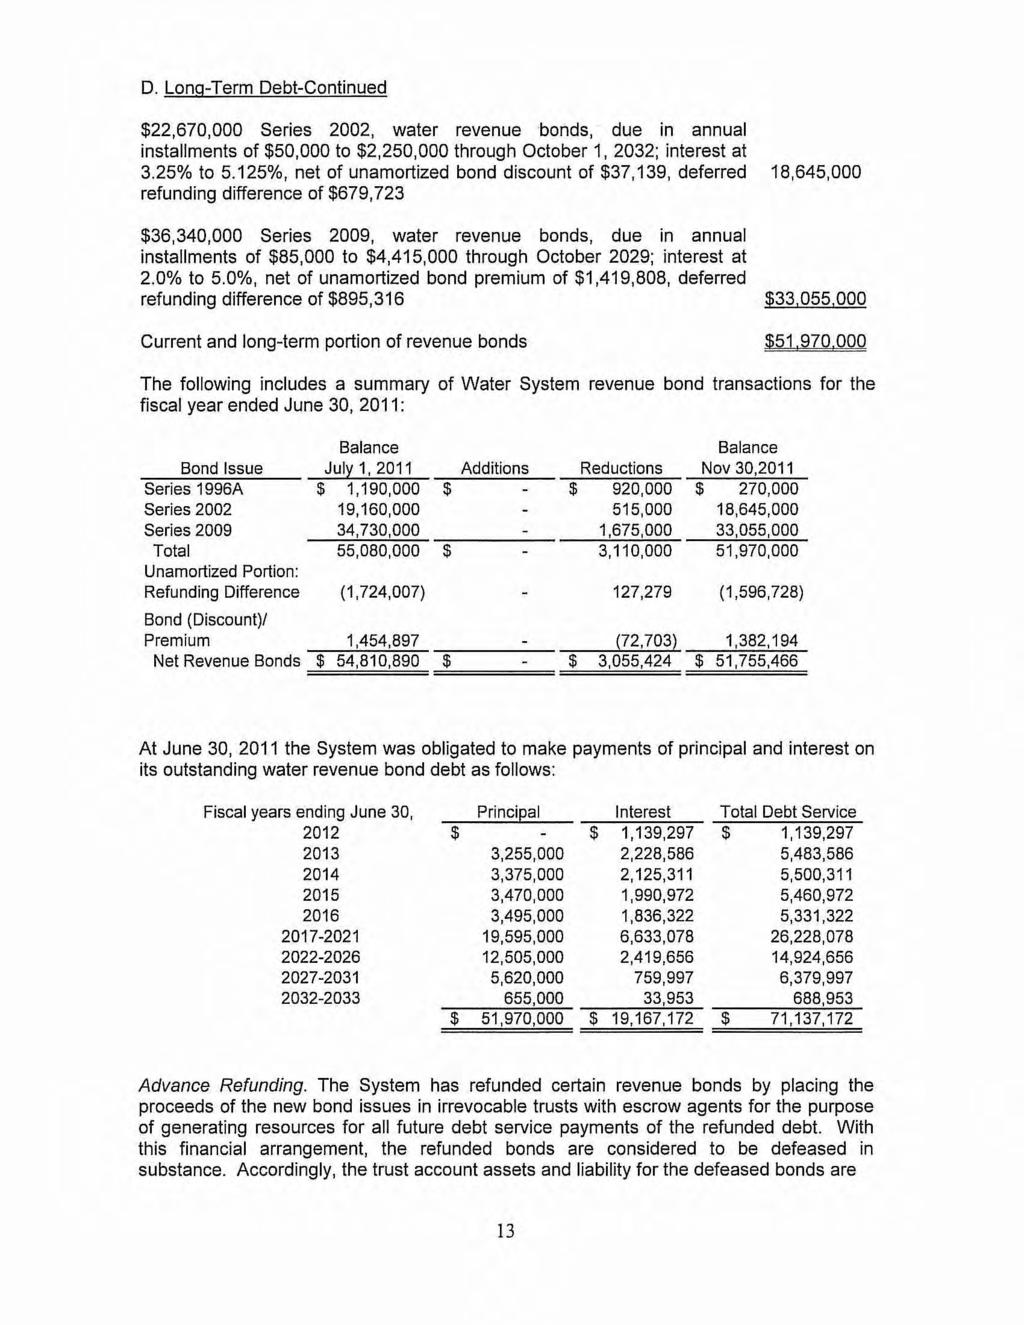 D. Long-Term Debt-Continued $22,670,000 Series 2002, water revenue bonds, due in annual installments of $50,000 to $2,250,000 through October 1, 2032; interest at 3.25% to 5.